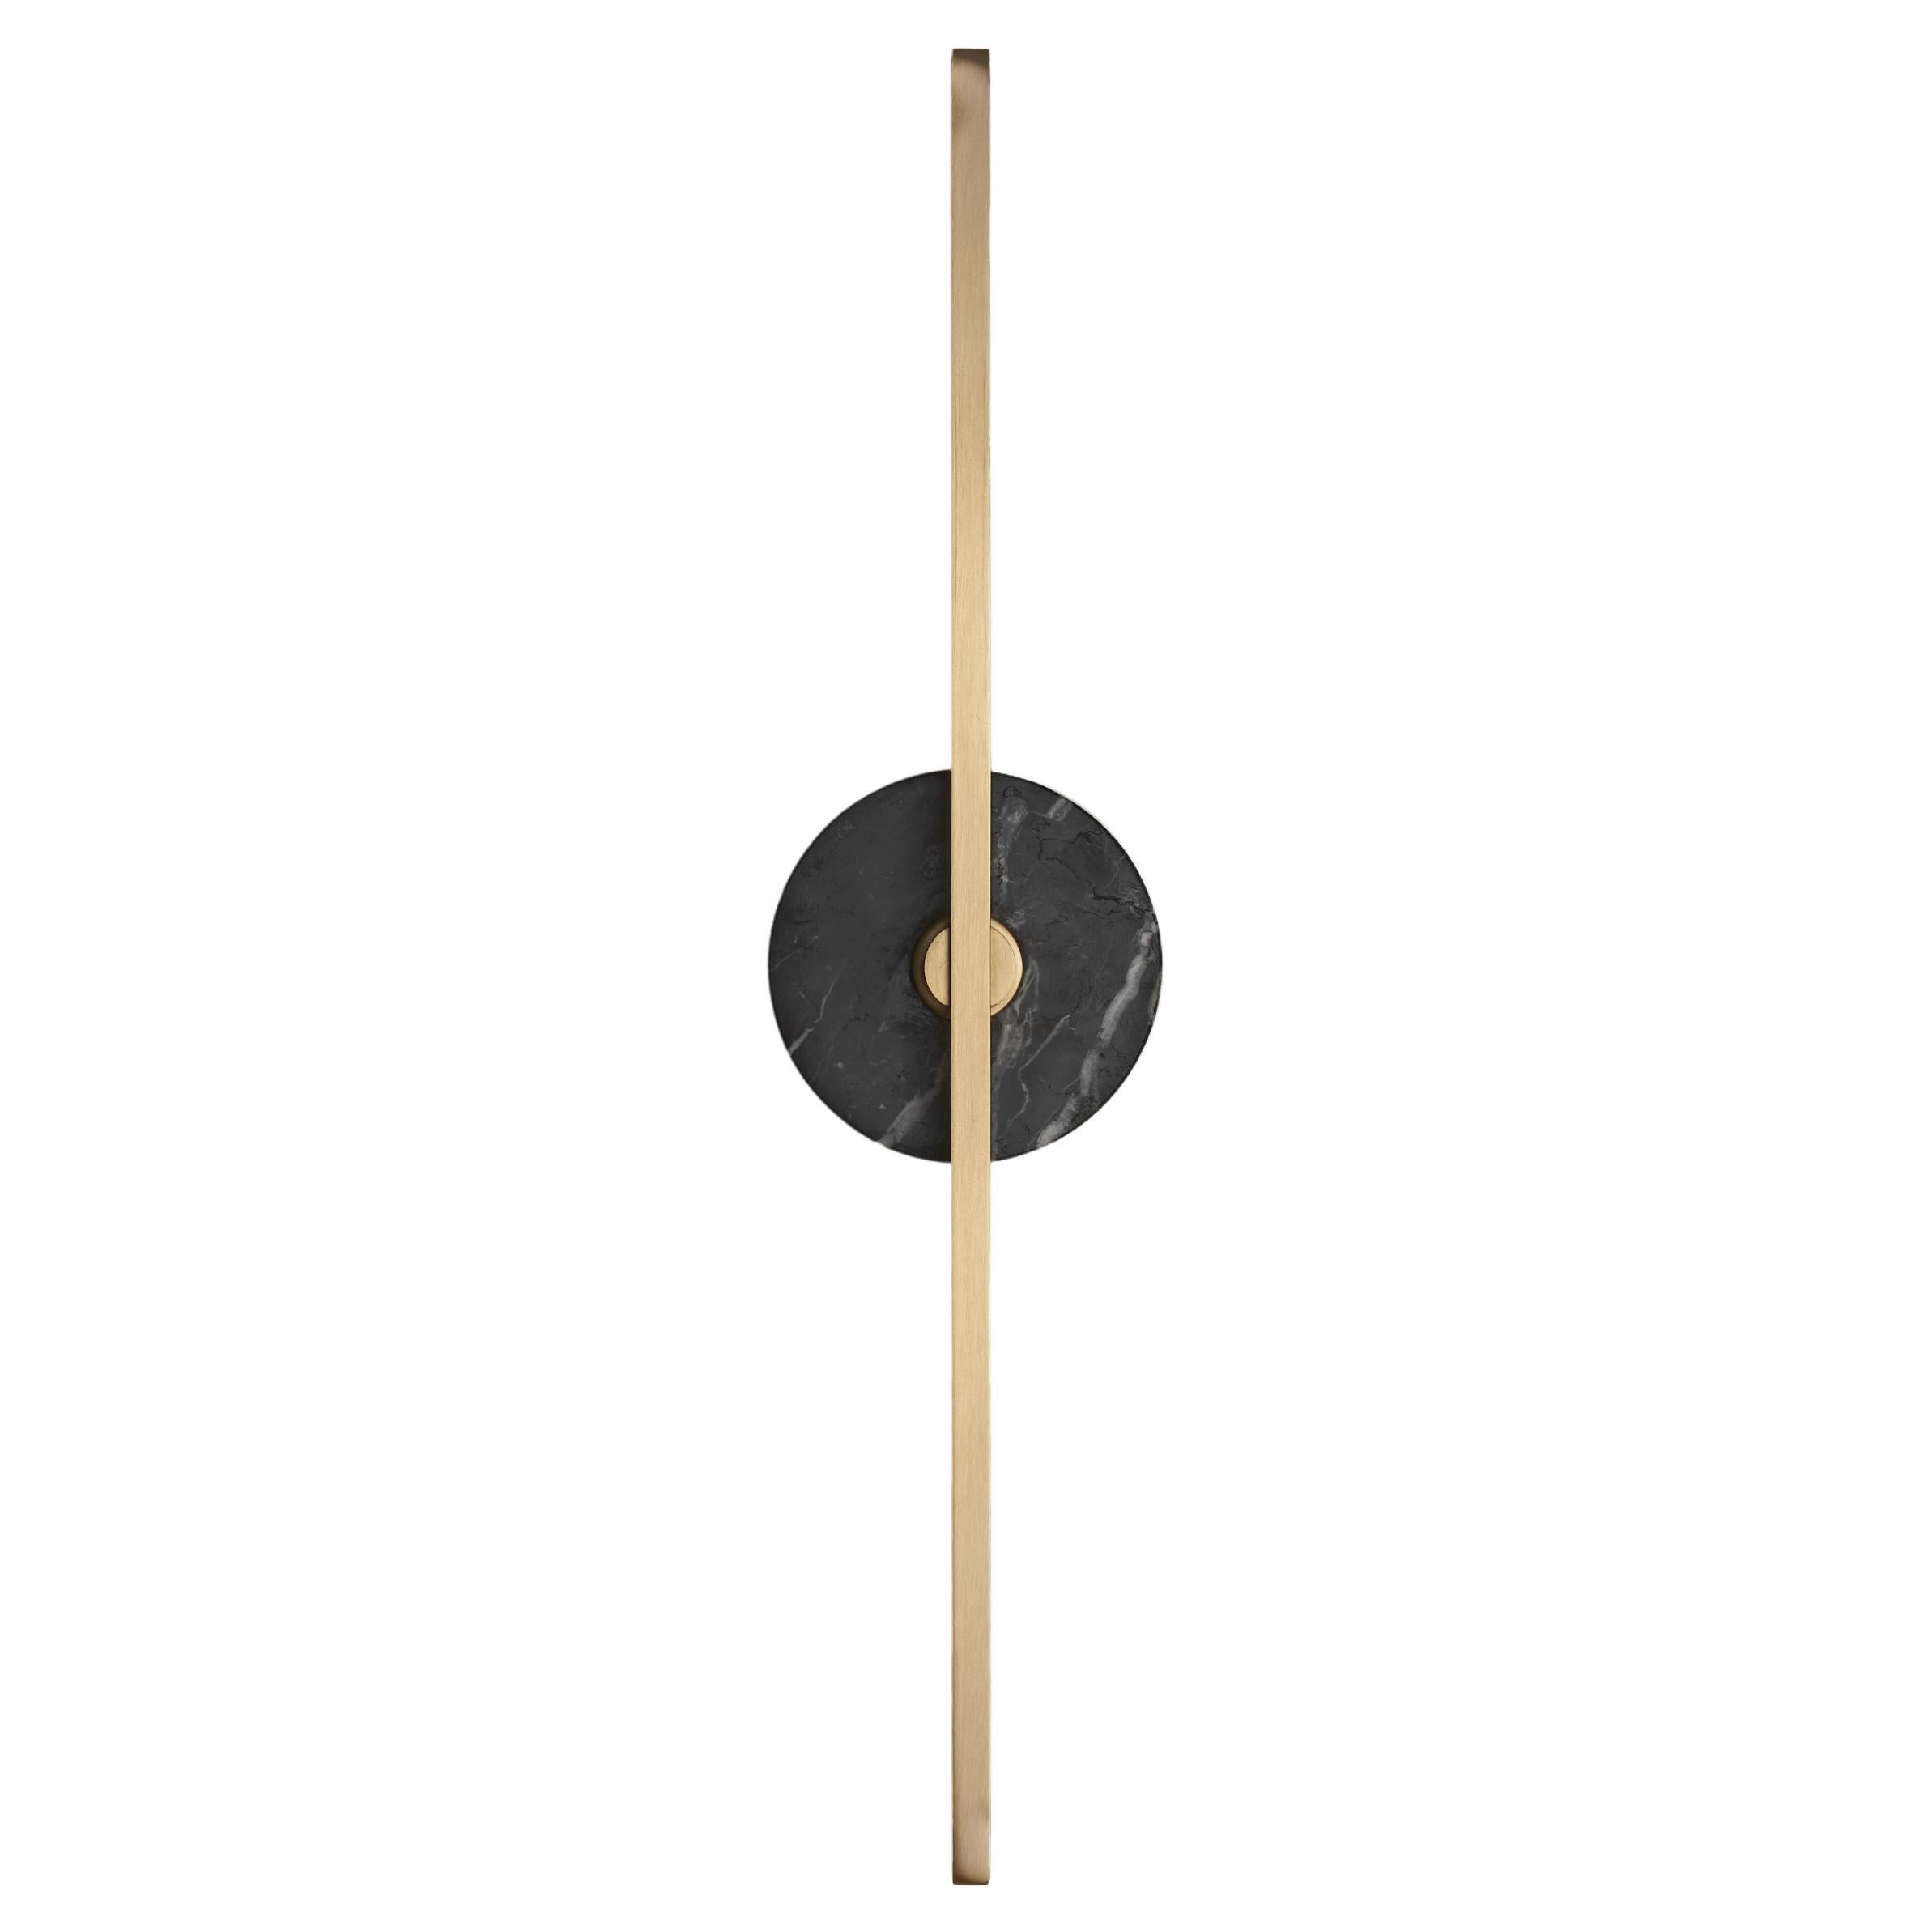 Essential Italian Wall Sconce "Stick" - Brass and Black Marquinha Marble